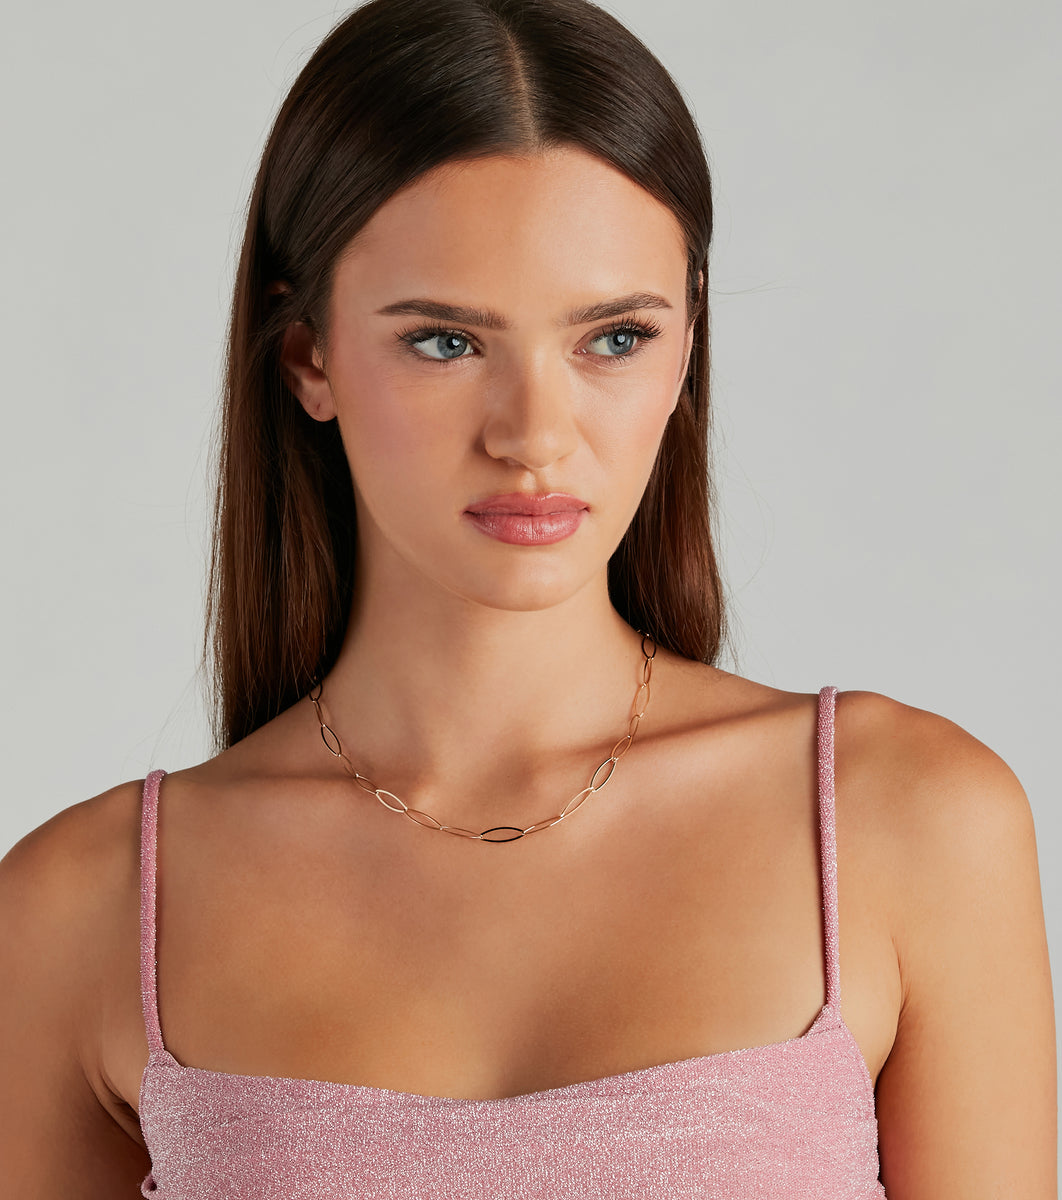 Classic And Sleek Dainty Chain Choker Necklace